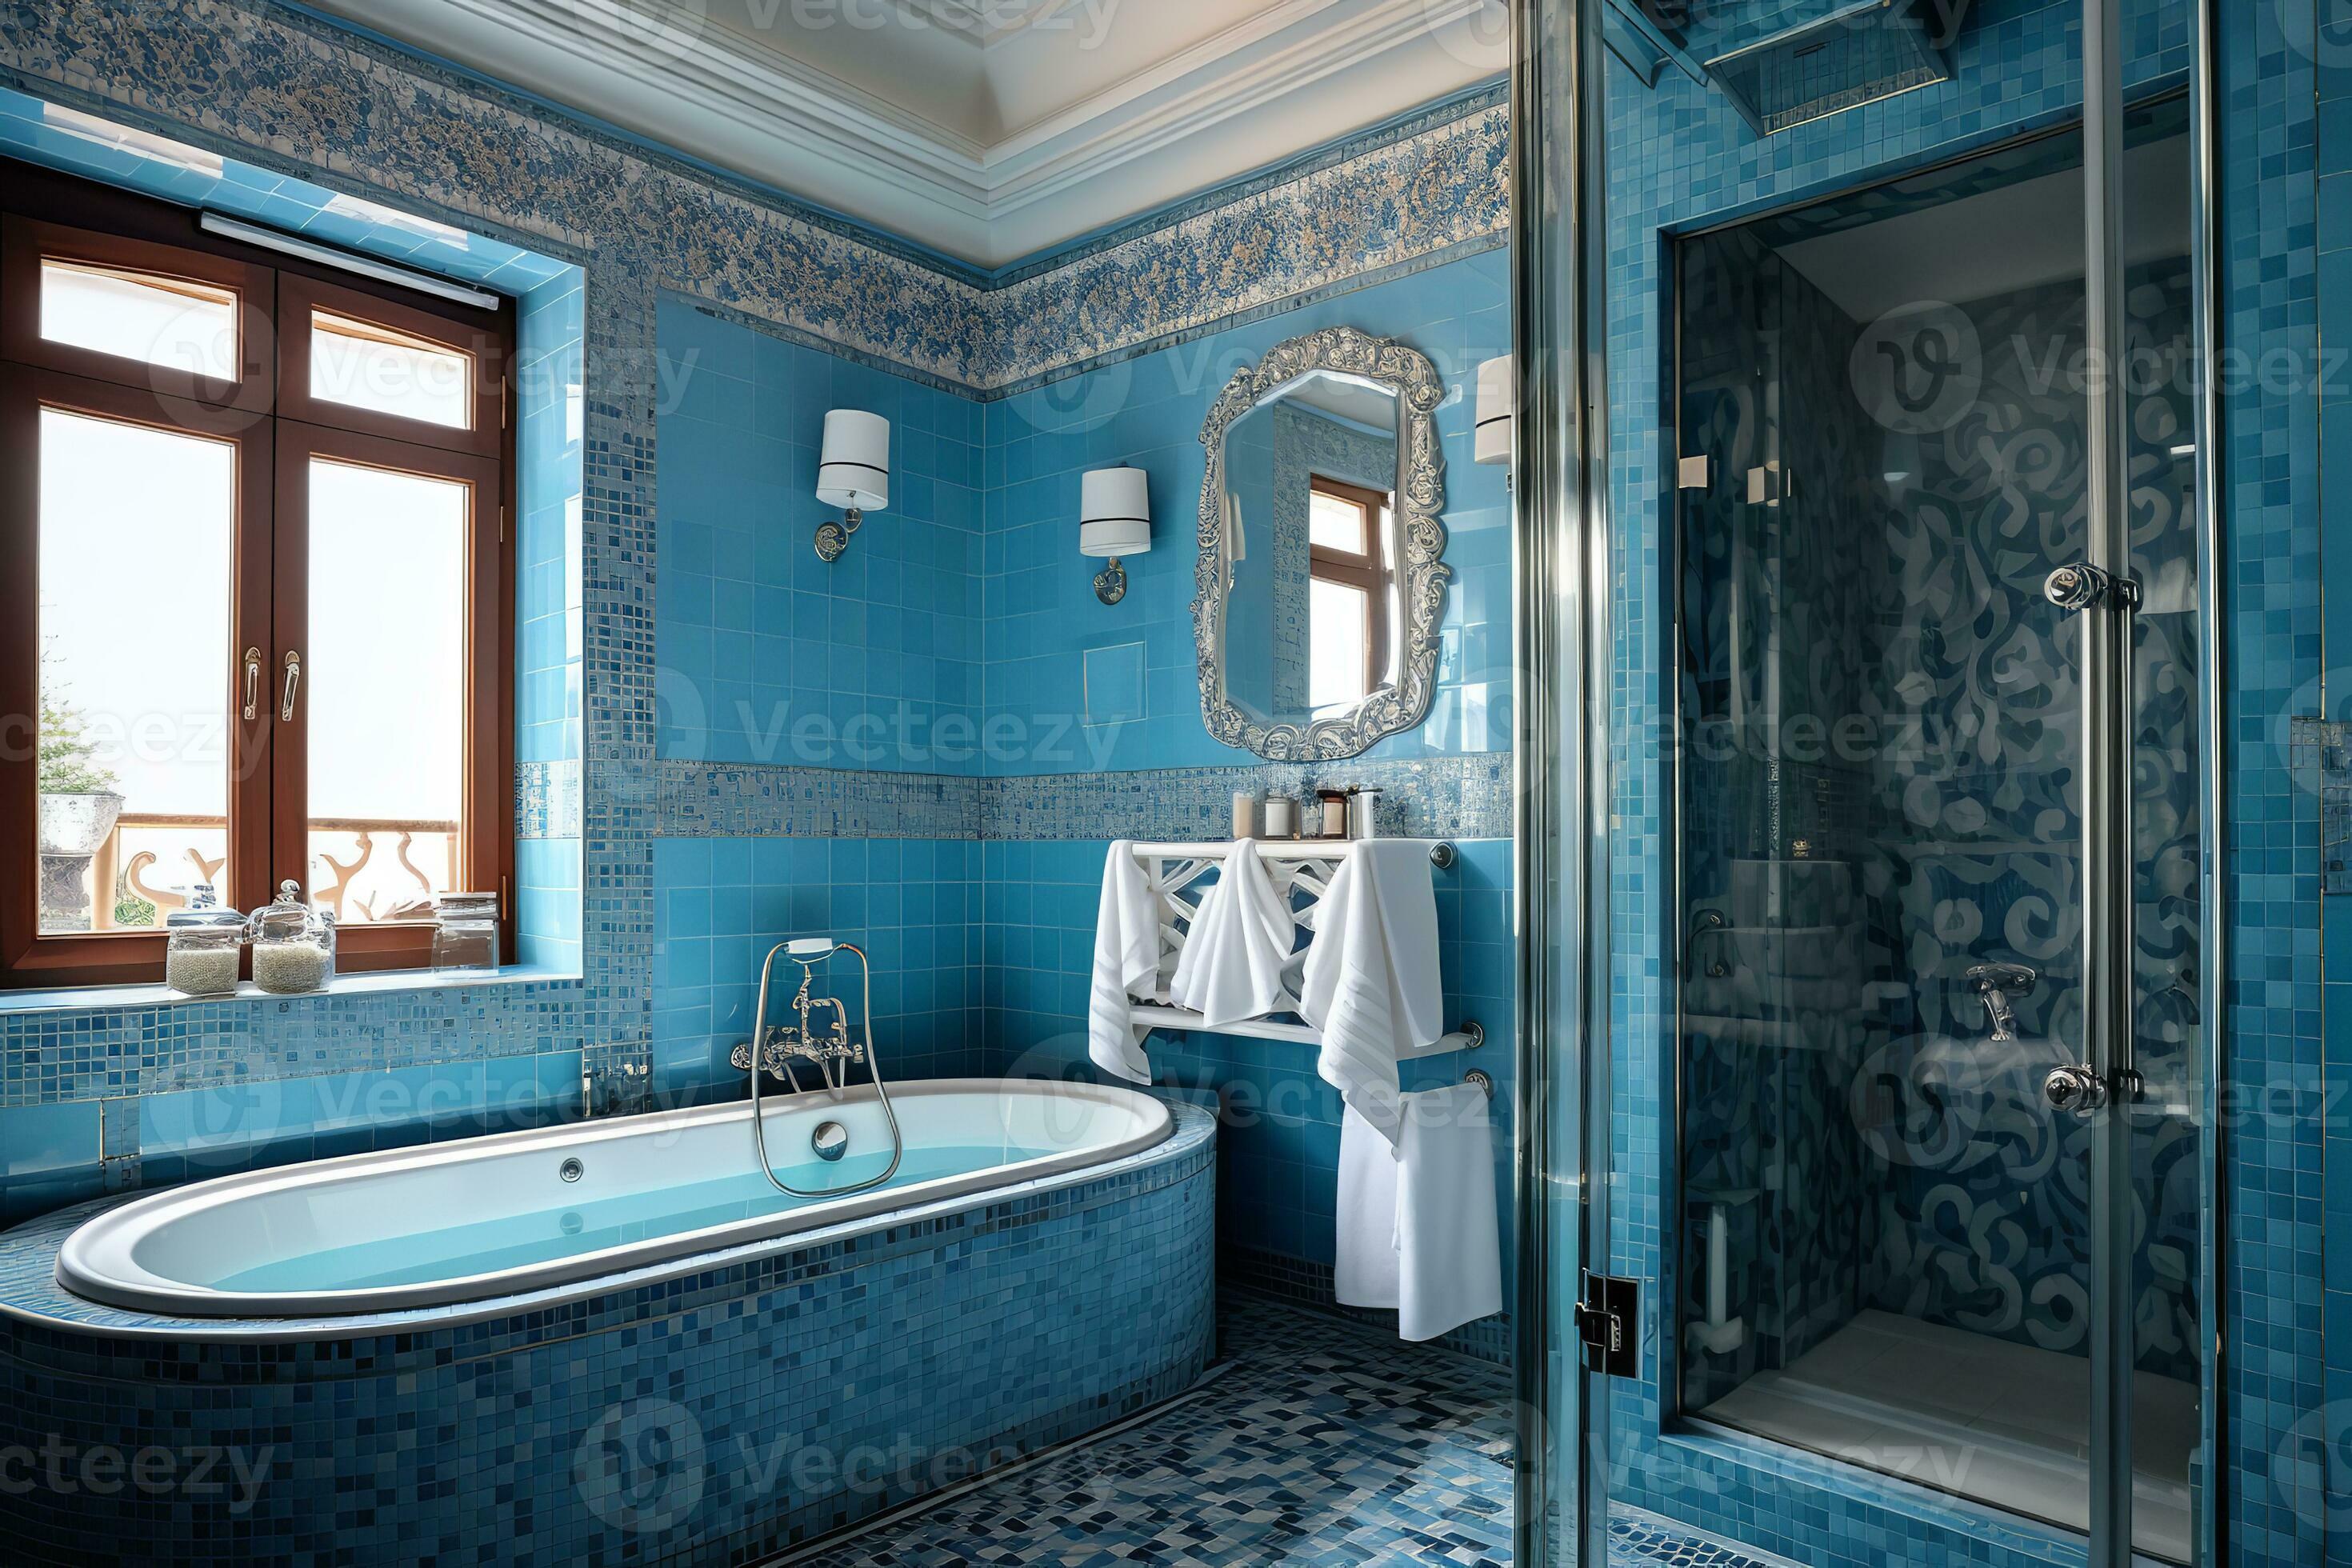 A stunning blue bathroom with a freestanding bathtub, walk-in shower, and  double sinks. The bathtub is positioned in the center of the room, with a  large window behind it that lets in